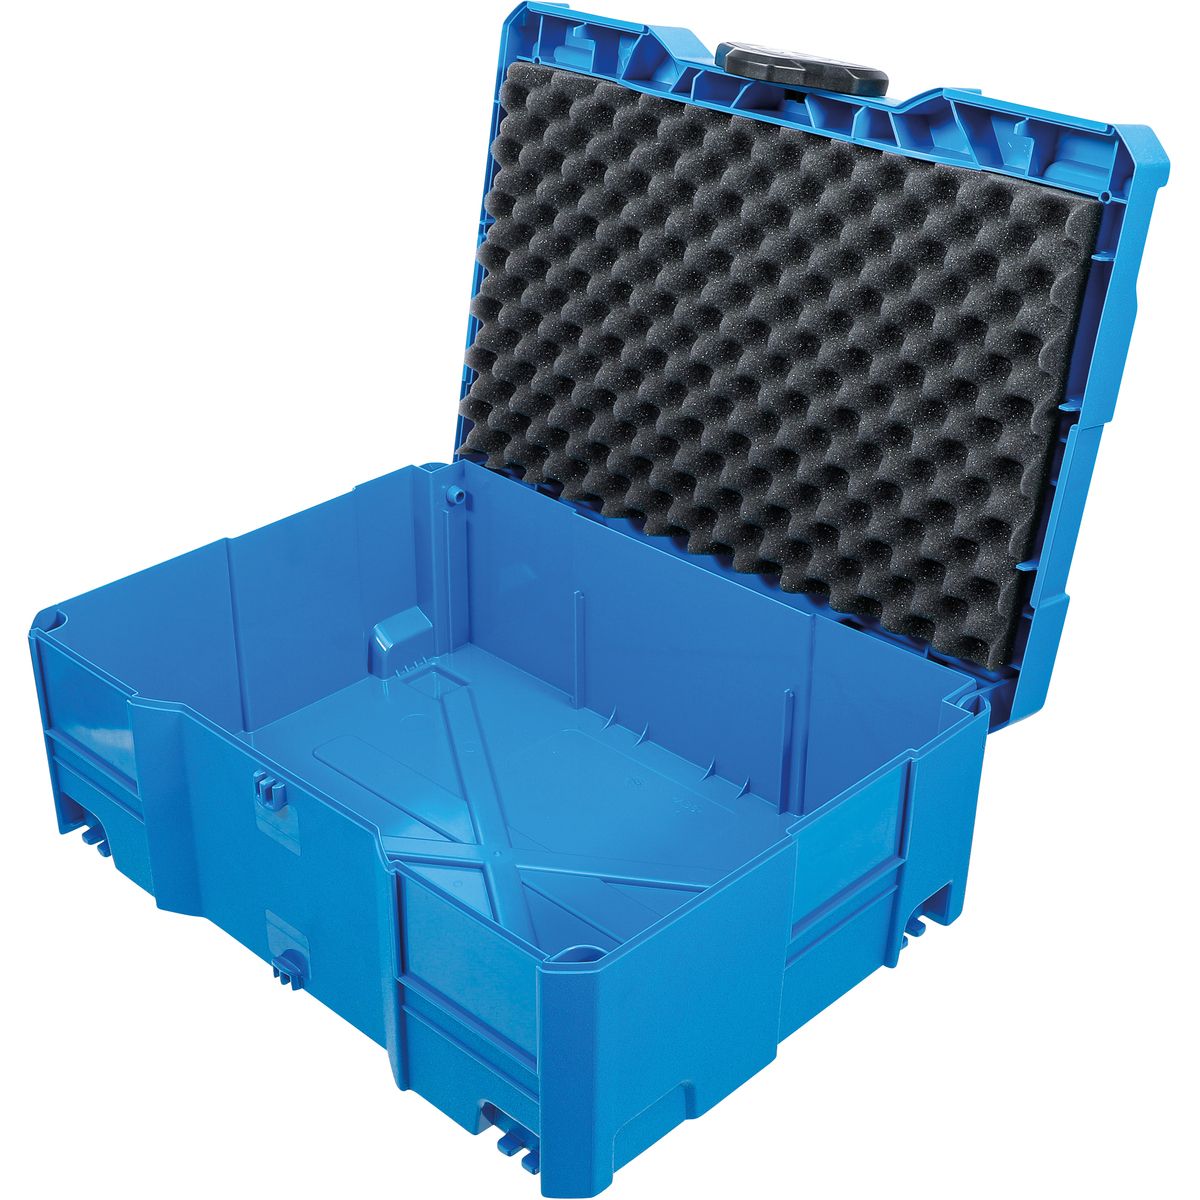 System Case | BGS systainer® T-Loc 2